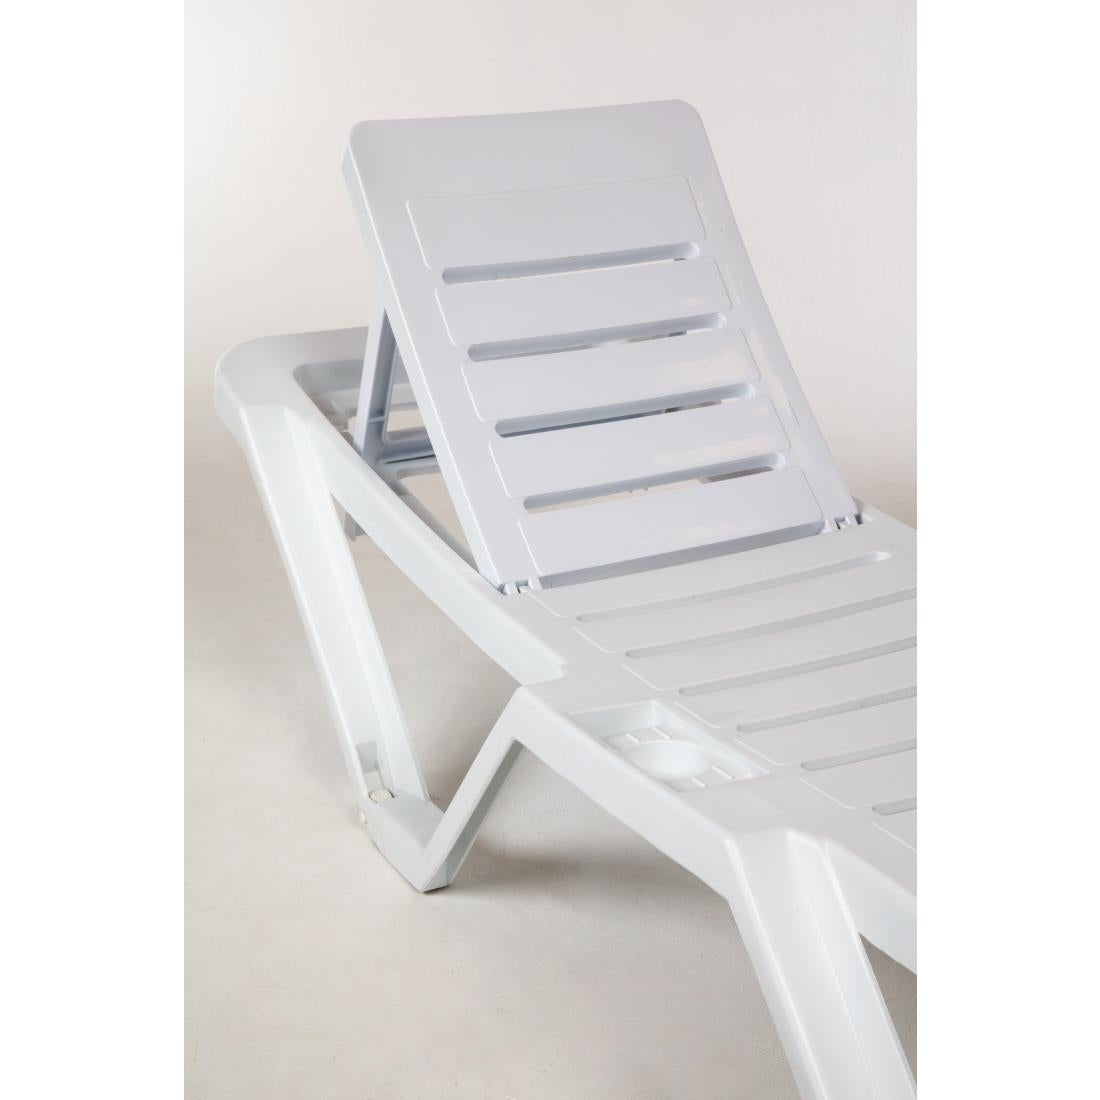 Resol Sun Lounger (Pack of 2)